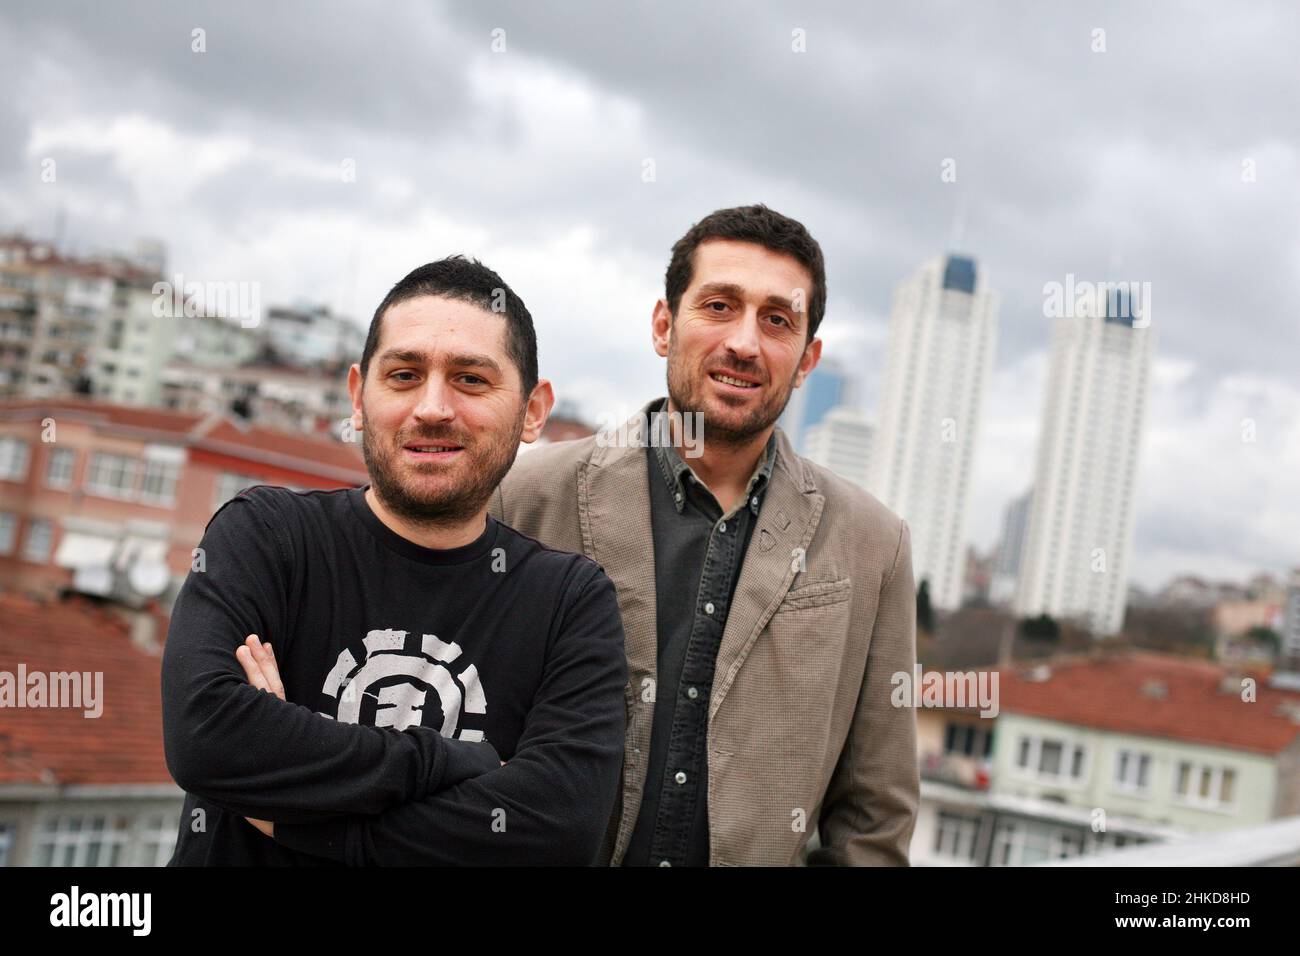 ISTANBUL, TURKEY - DECEMBER 10: Famous Turkish film directors Taylan Brothers “Yagmur and Durul” on December 19, 2009 in Istanbul, Turkey. The brothers are currently tv series 'Magnificent Century'. Stock Photo